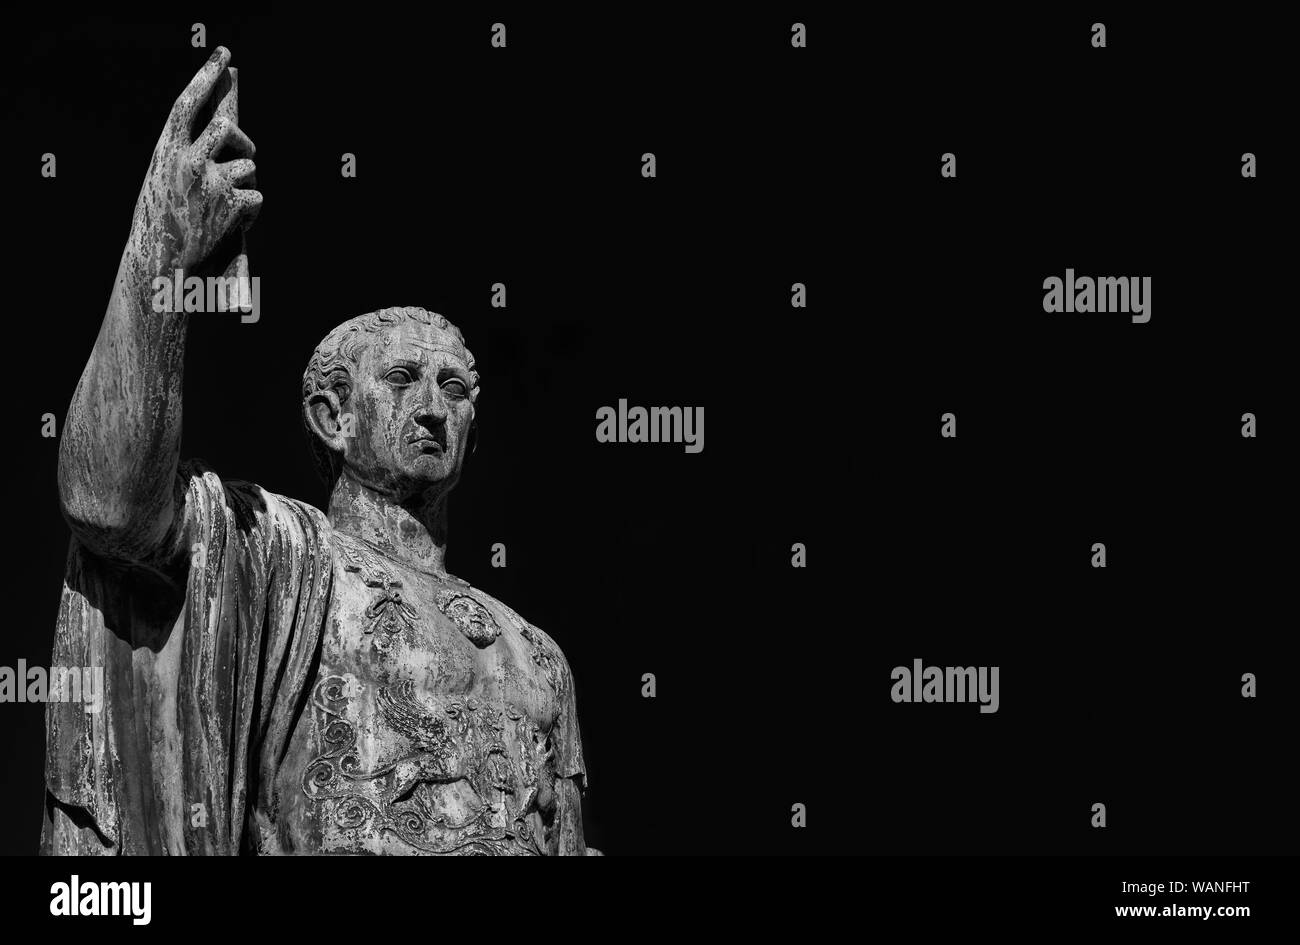 Caesar Augustus Nerva Emperor of Ancient Rome bronze statue in Imperial Forum (Black and White with copy space) Stock Photo